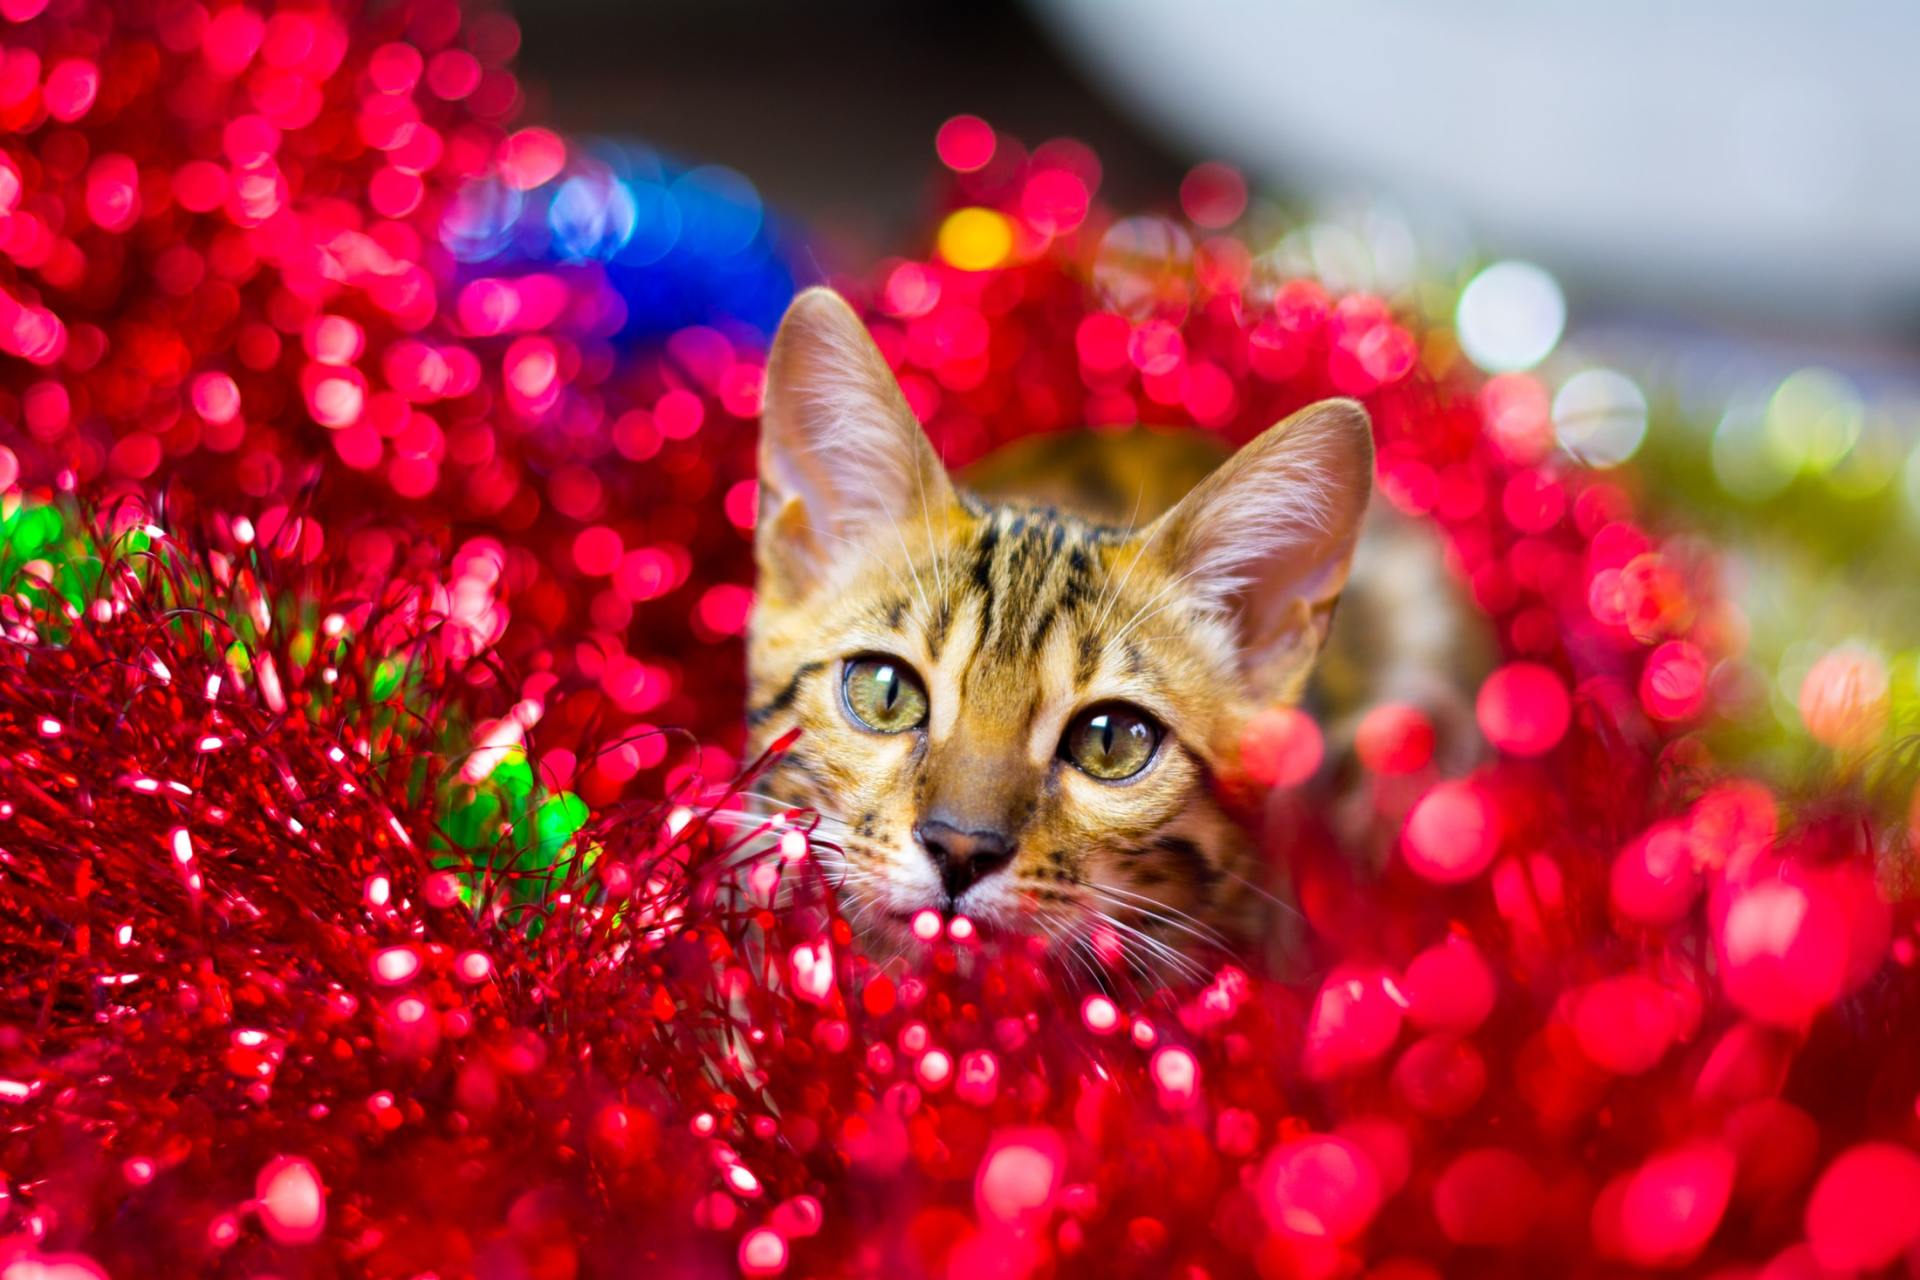 6 Things Your Cat Will Do Over The Holidays